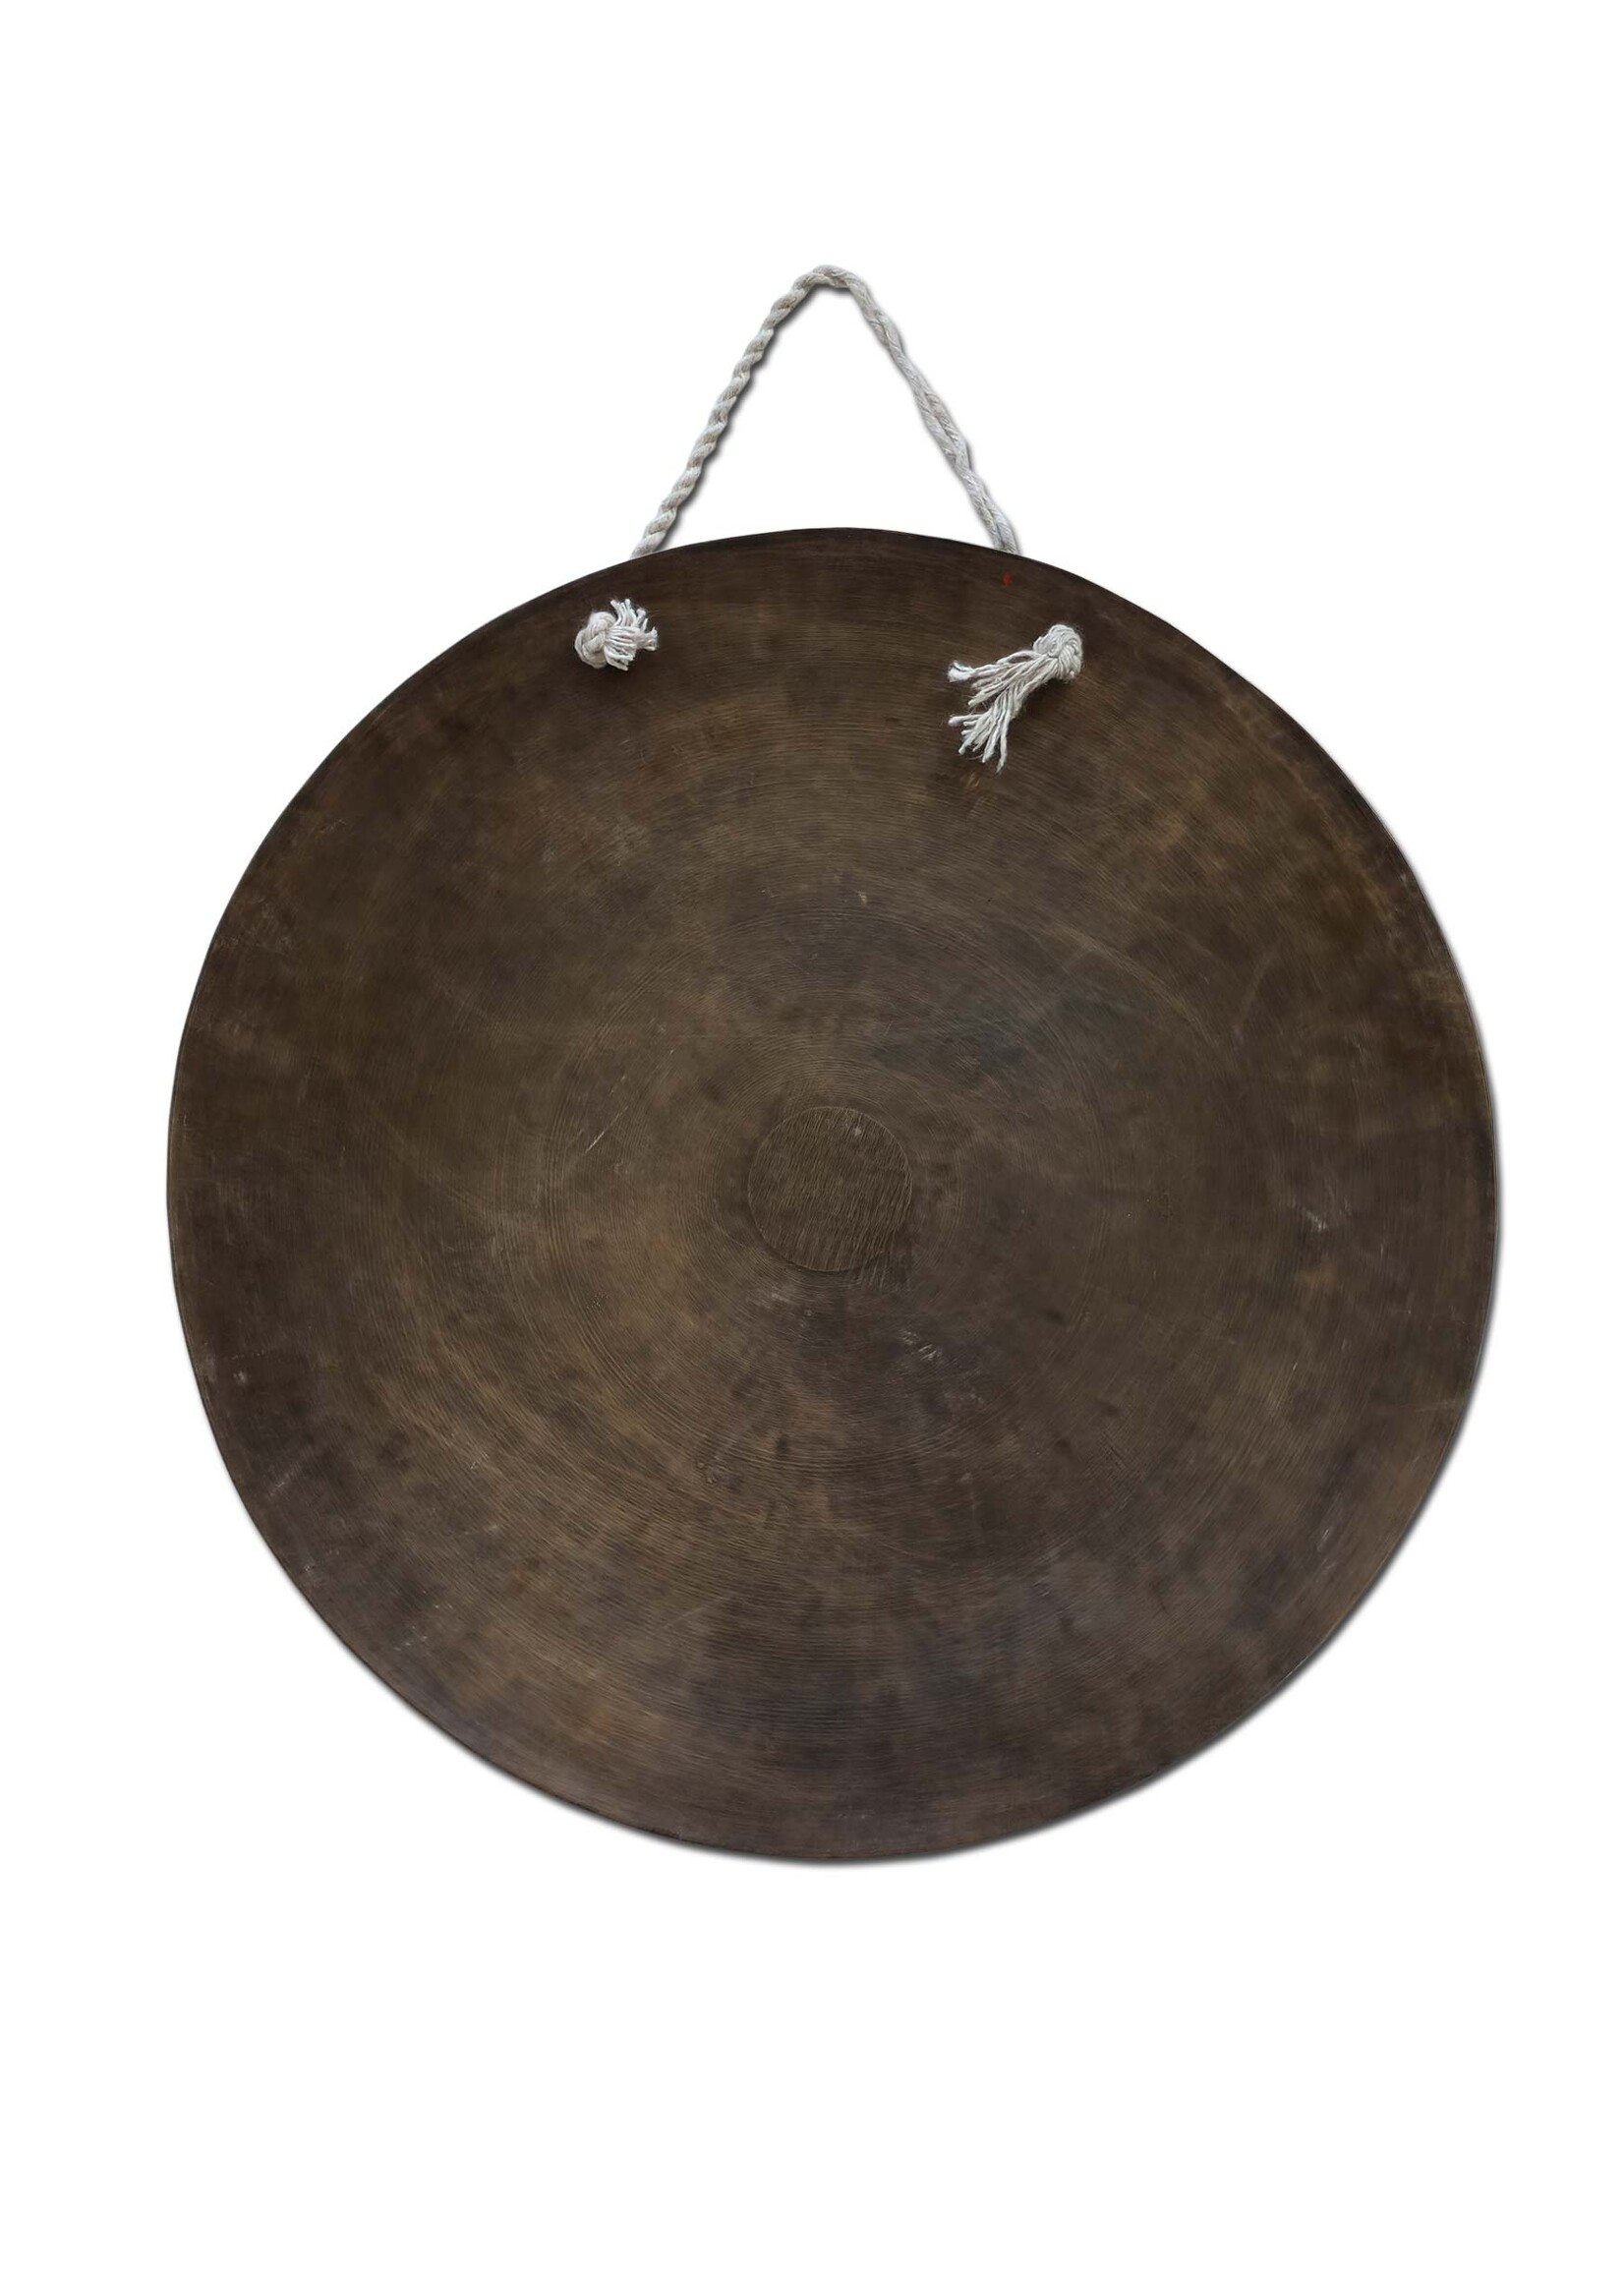 Tibetan Gong Engraved With Mantras and Double Dorje